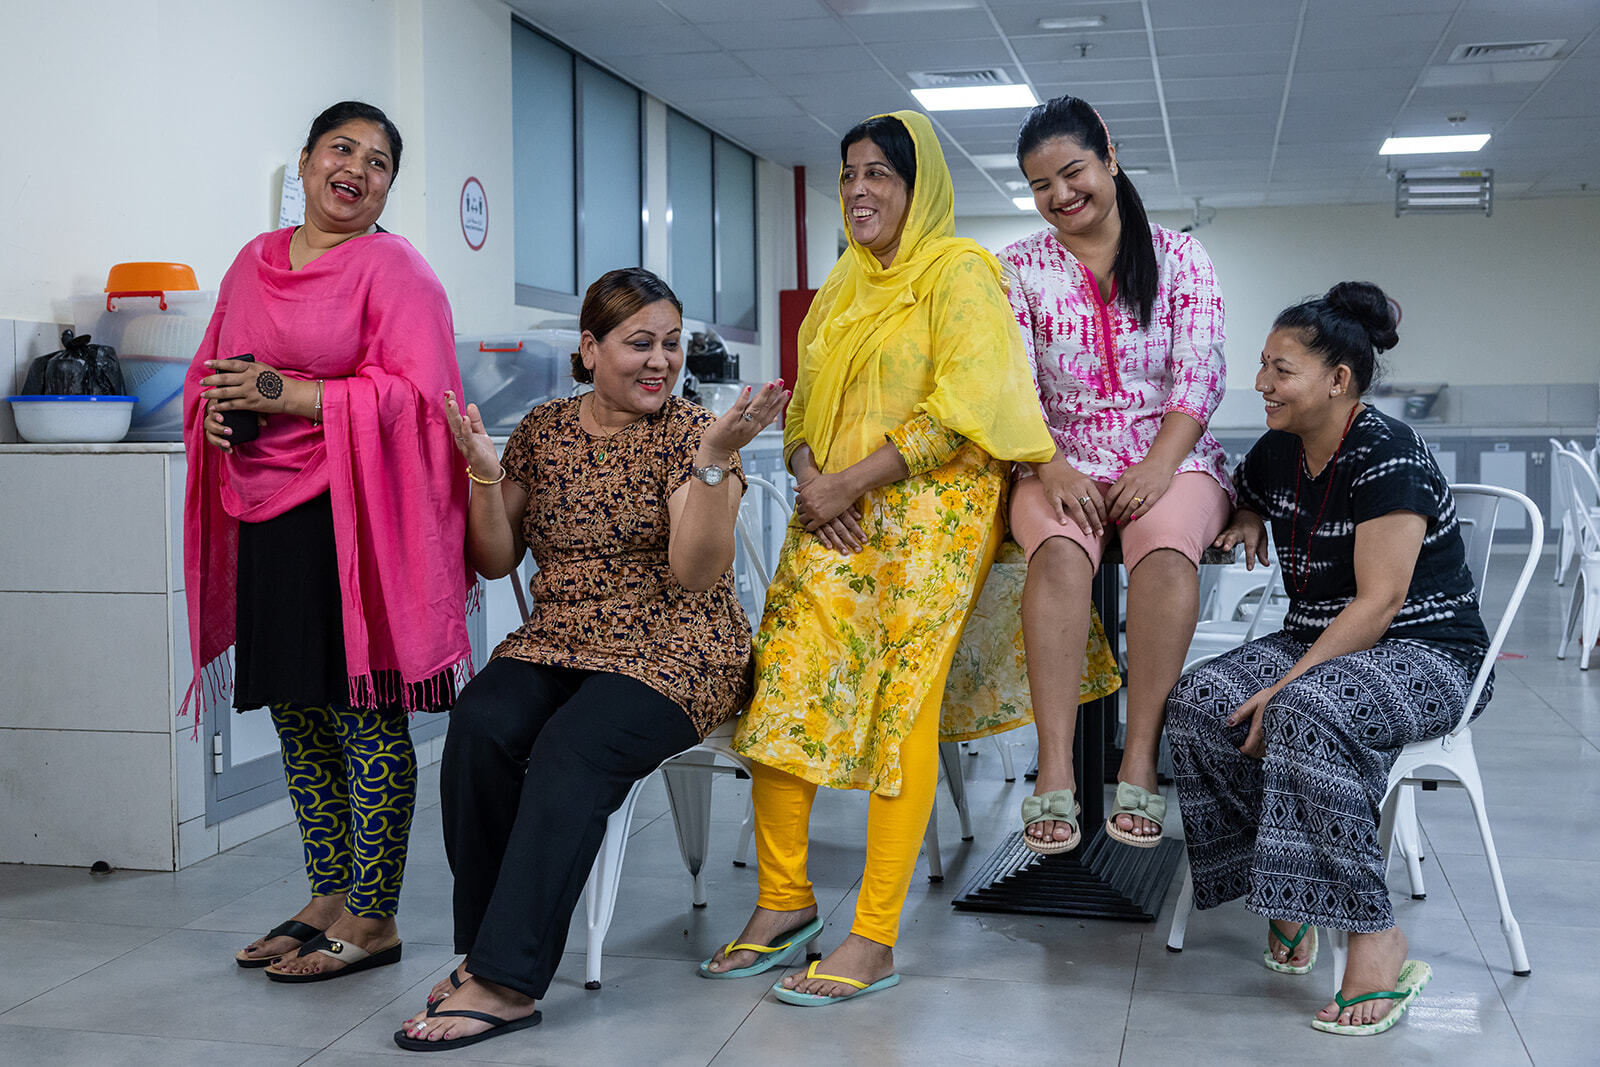 Five women in an office environment, dressed in casual clothing. The women are smiling and laughing.